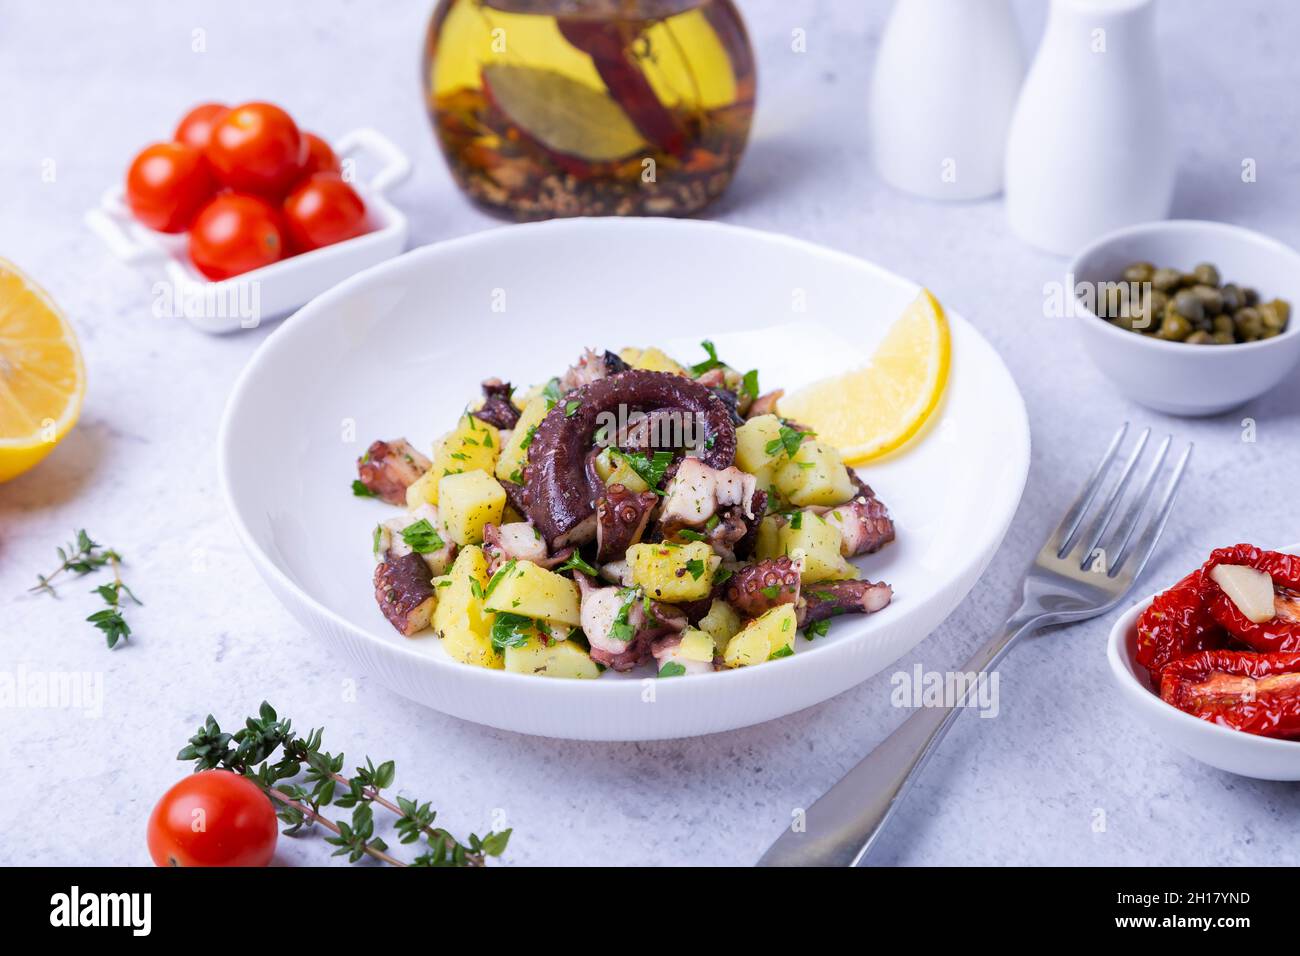 Warm salad with octopus, potatoes, tomatoes, capers and lemon on a white plate. Close-up, white background. Stock Photo